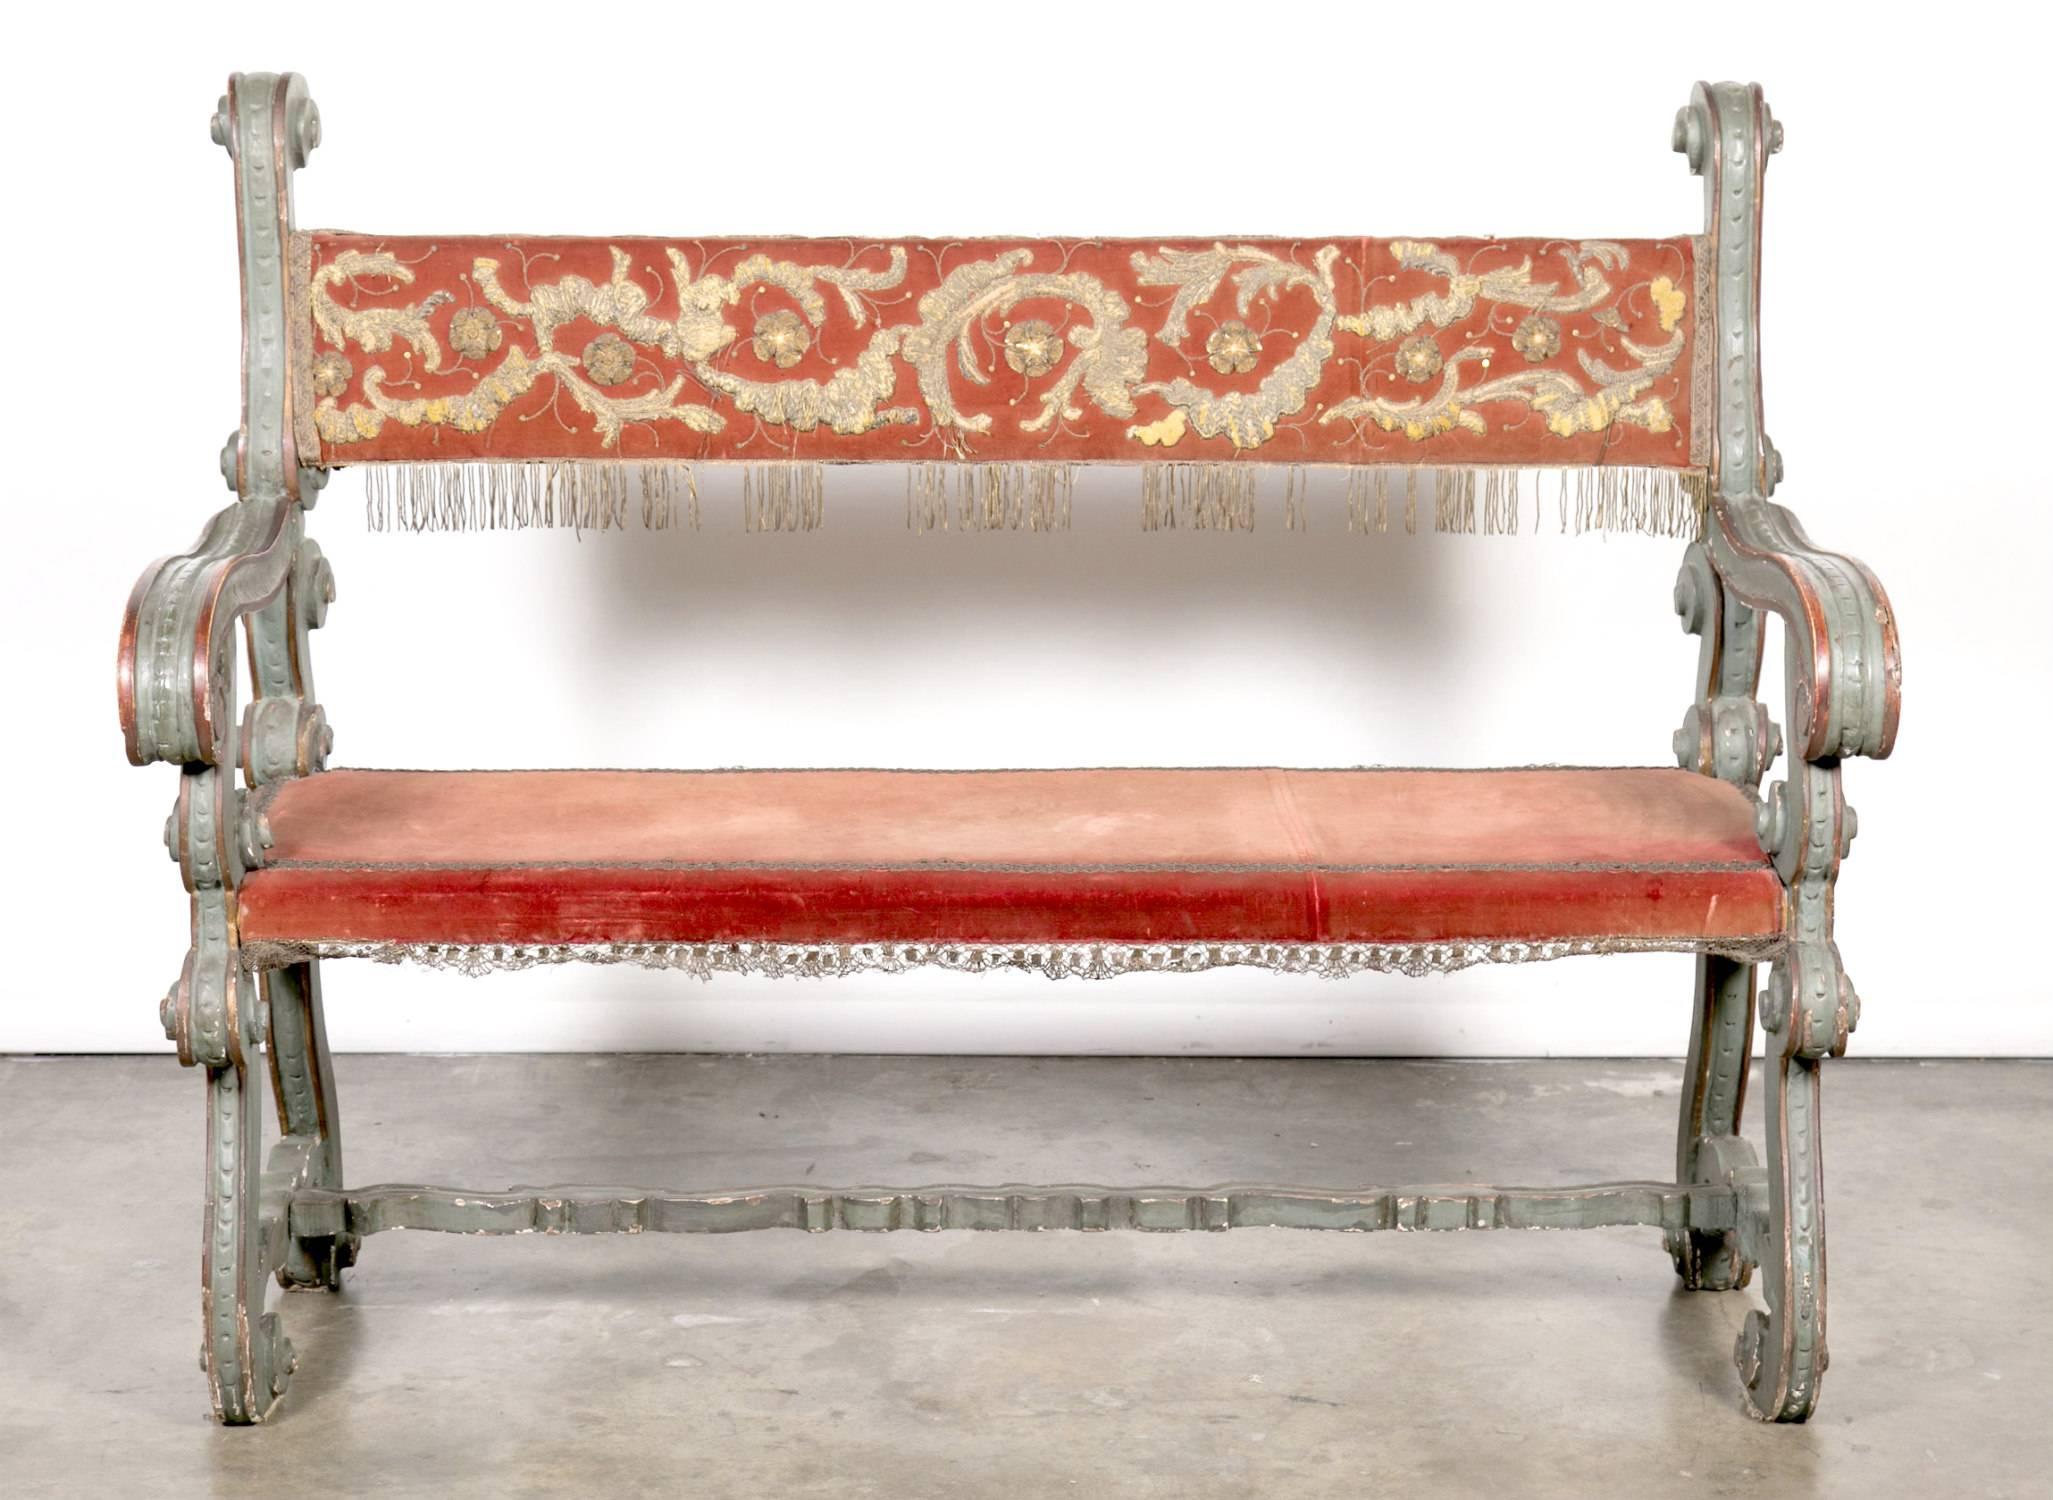 A fabulous pair of 18th century painted Baroque style Tuscan arm benches with carved lyre shaped legs joined by a carved stretcher and upholstered with antique ecclesiastical embroidered fabric and fringe. The well defined and raised metallic gold